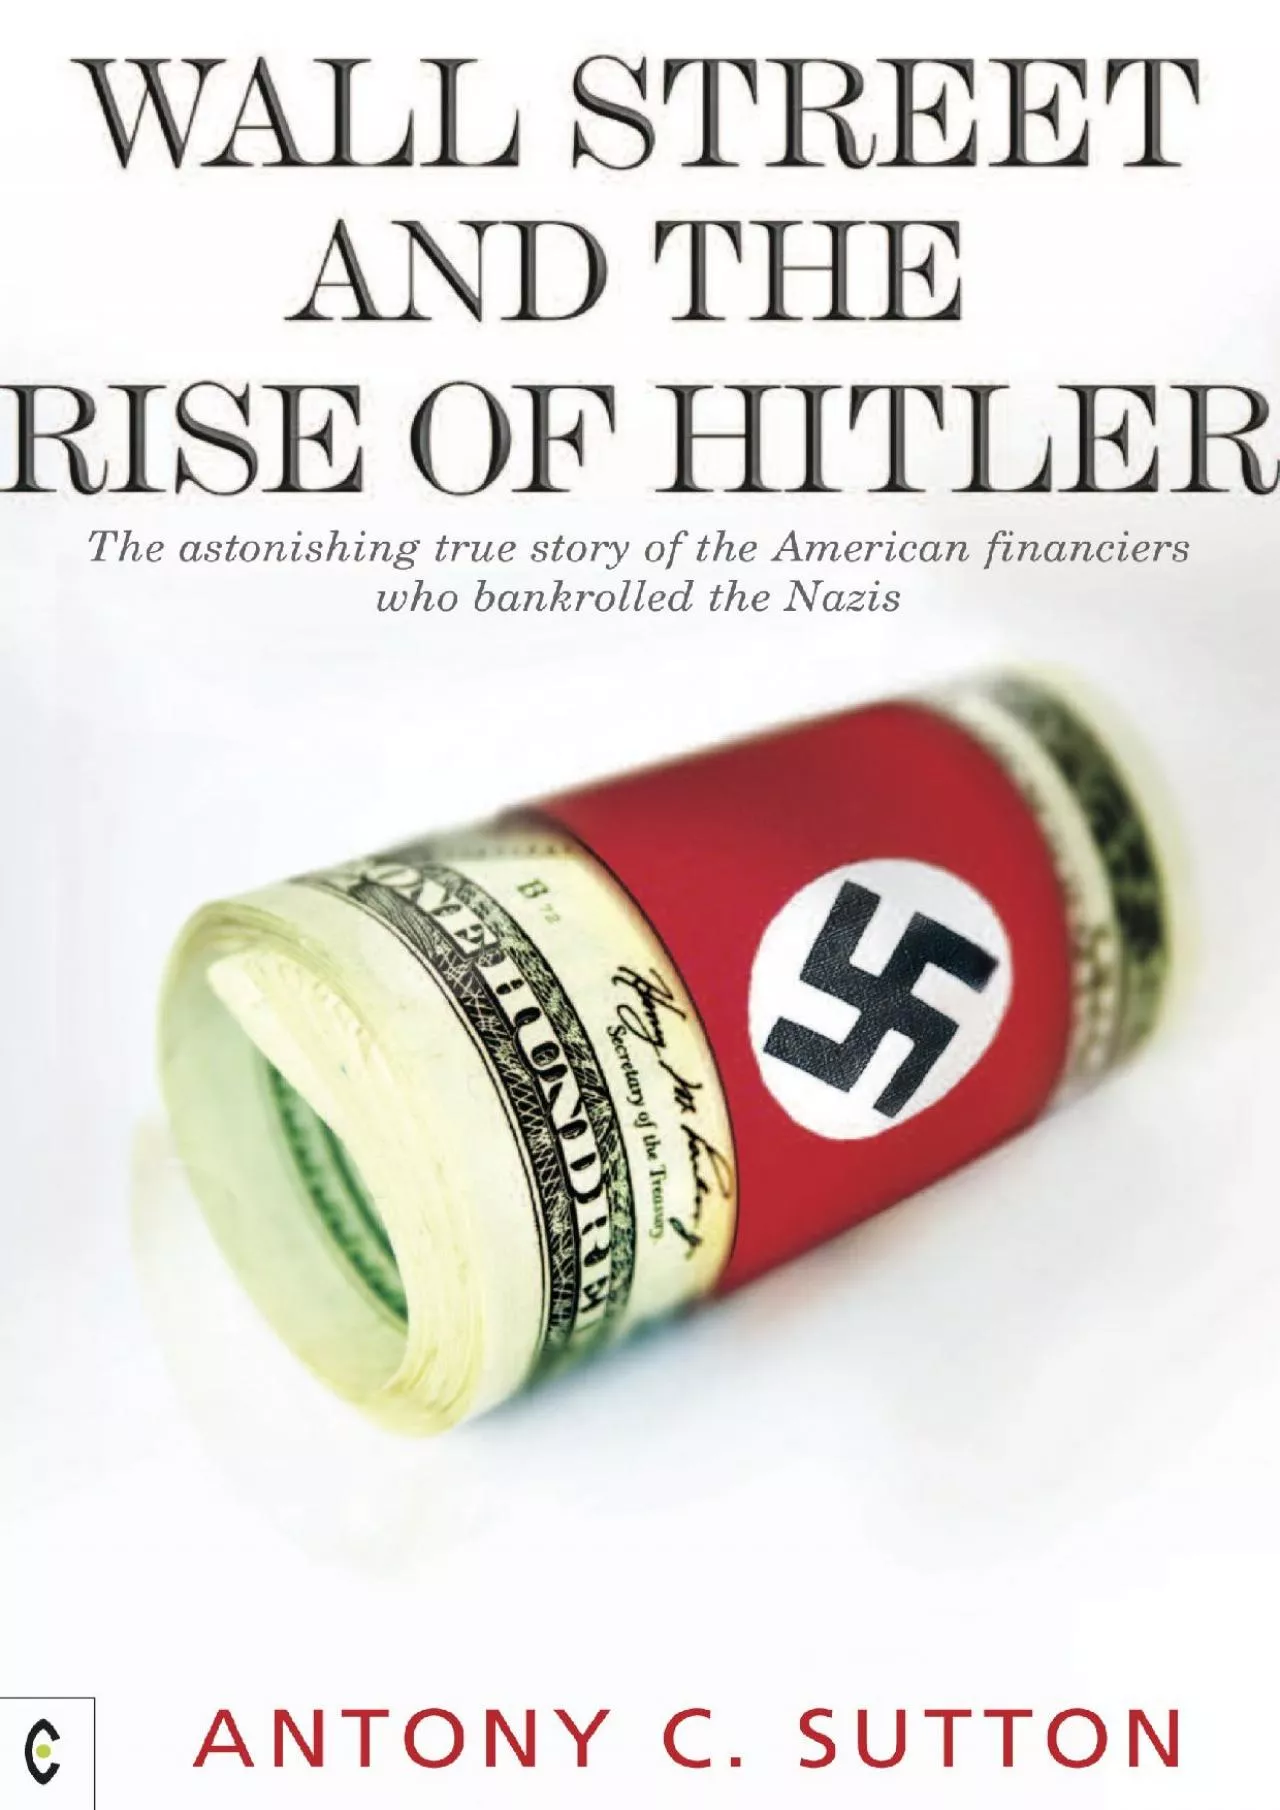 Wall Street and the Rise of Hitler: The Astonishing True Story of the American Financiers